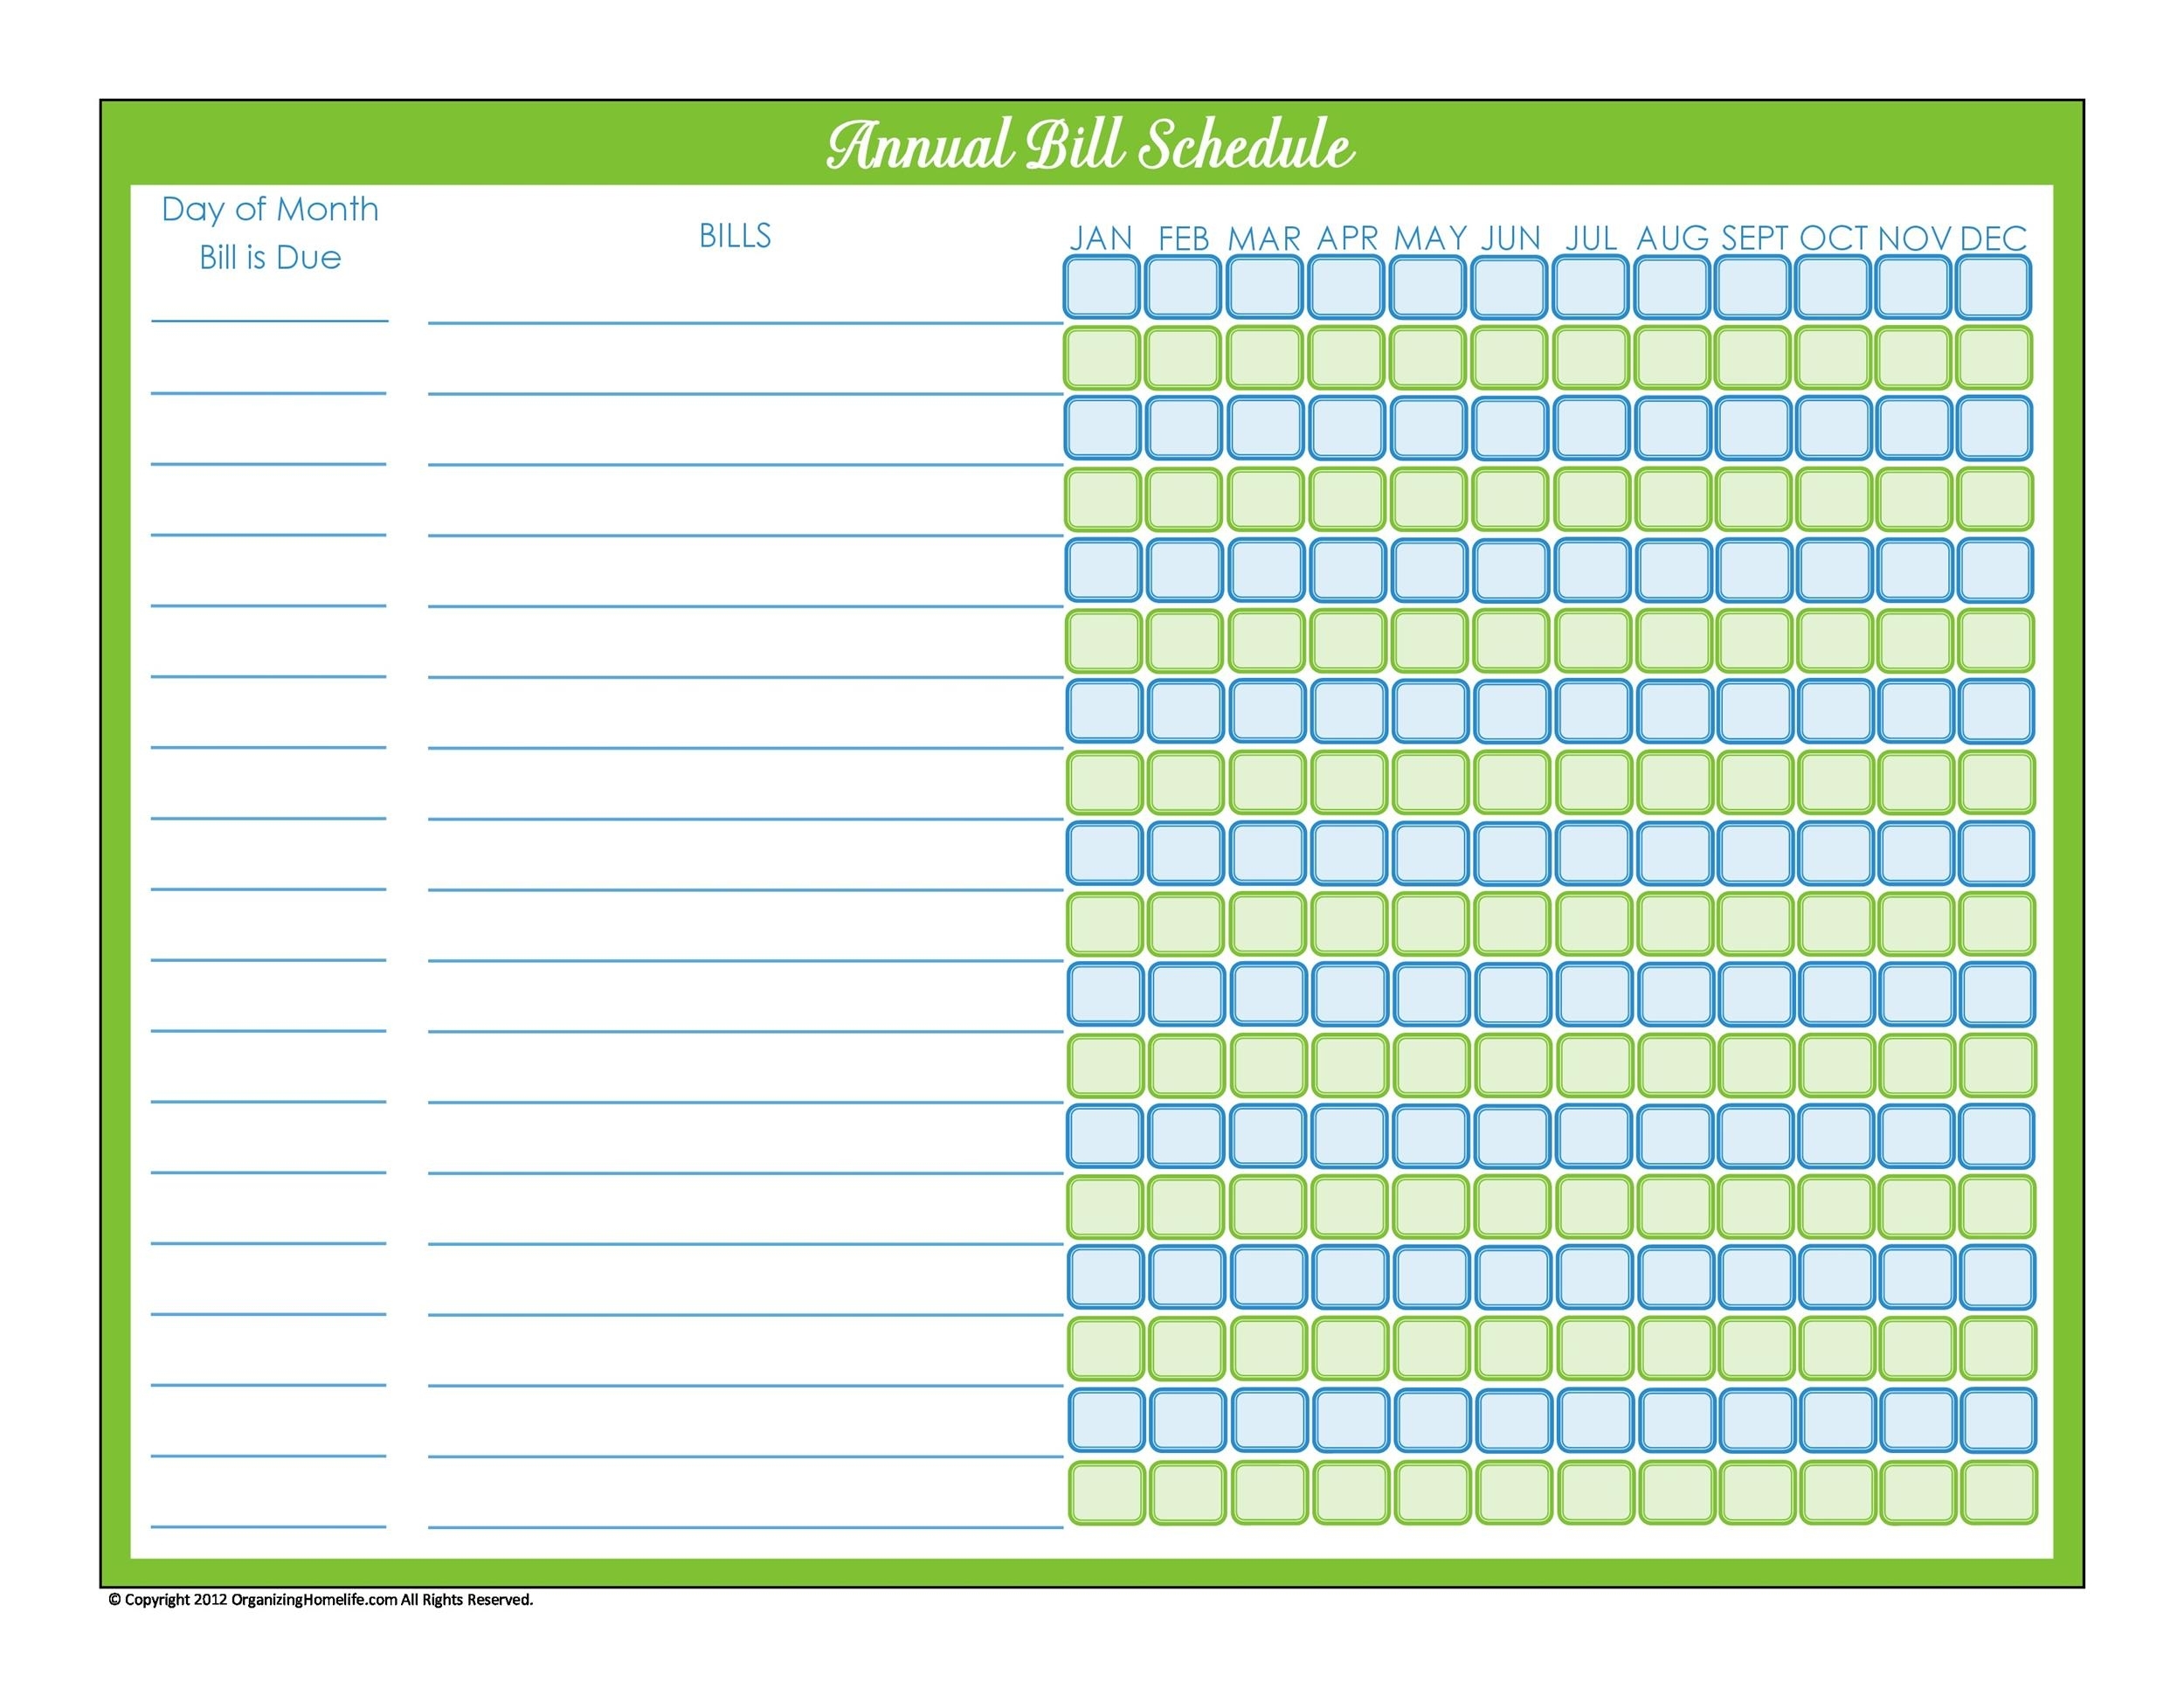 33 Free Bill Pay Checklists &amp; Bill Calendars (Pdf, Word &amp; Excel) with 30 Day Blank Calendar For Bills Due